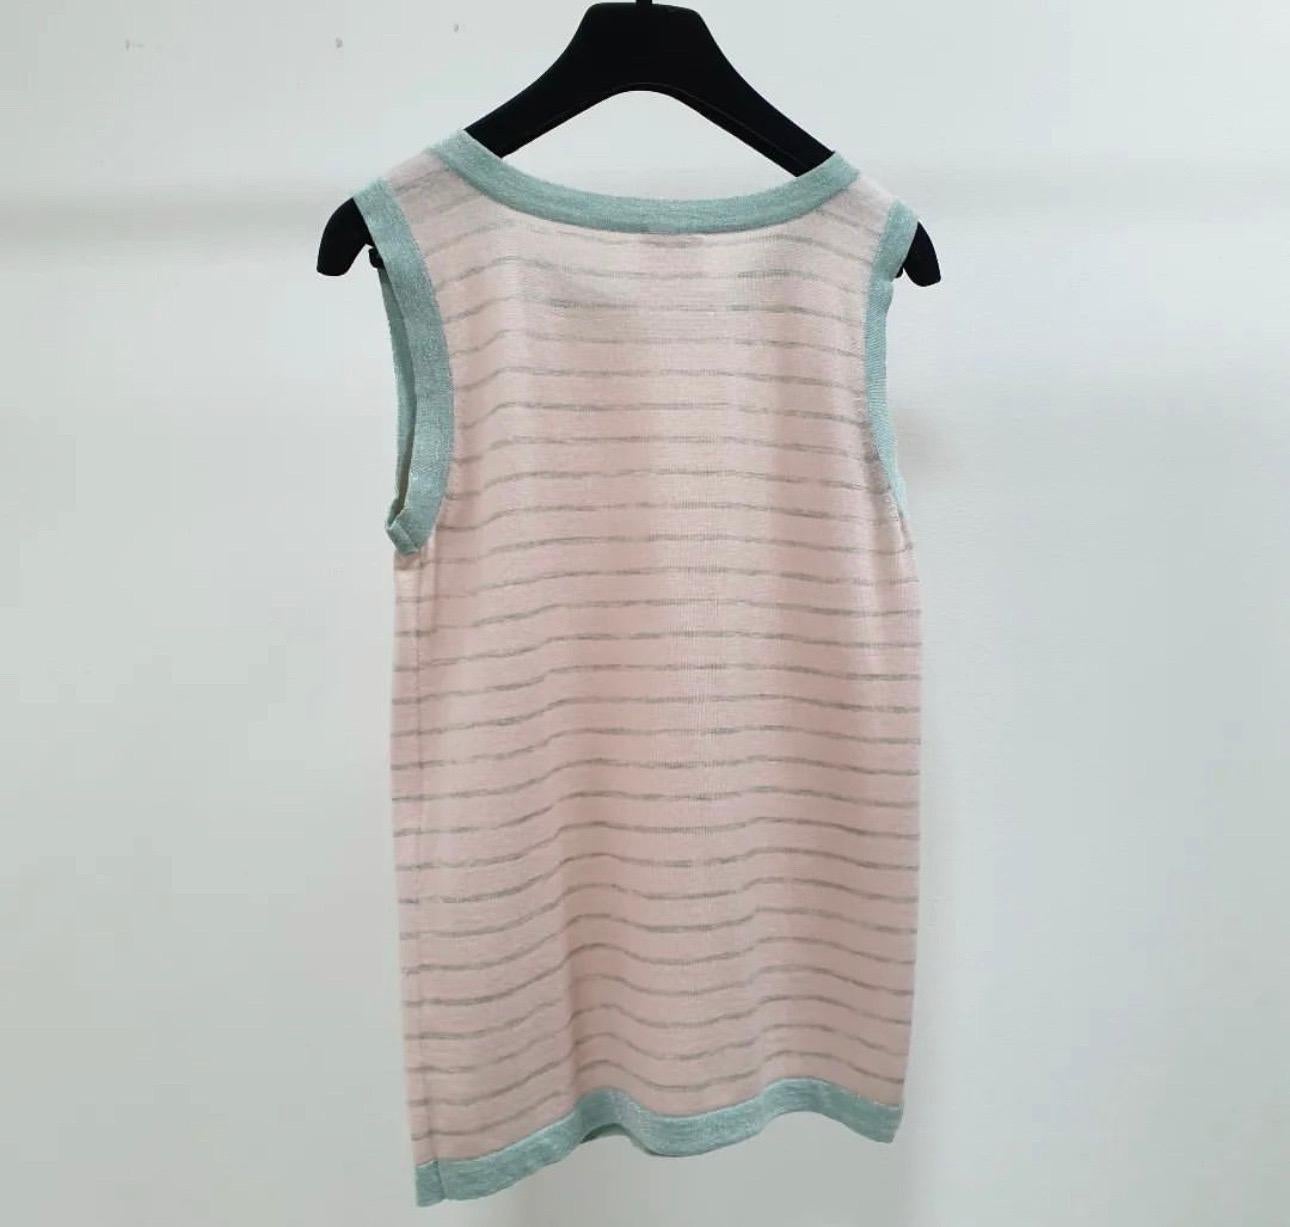 CHANEL CC LOGO STRIPED  CASHMERE BLEND TOP SWEATER FROM  09C COLLECTION.

PRE-OWNED IN GOOD CONDITION

GREY/PINK  COLOR WITH METALLIC PINK TRIM.

HUGE CC WOWEN LOGO IN THE FRONT. 
Sz.36
Flaws seen on pics.